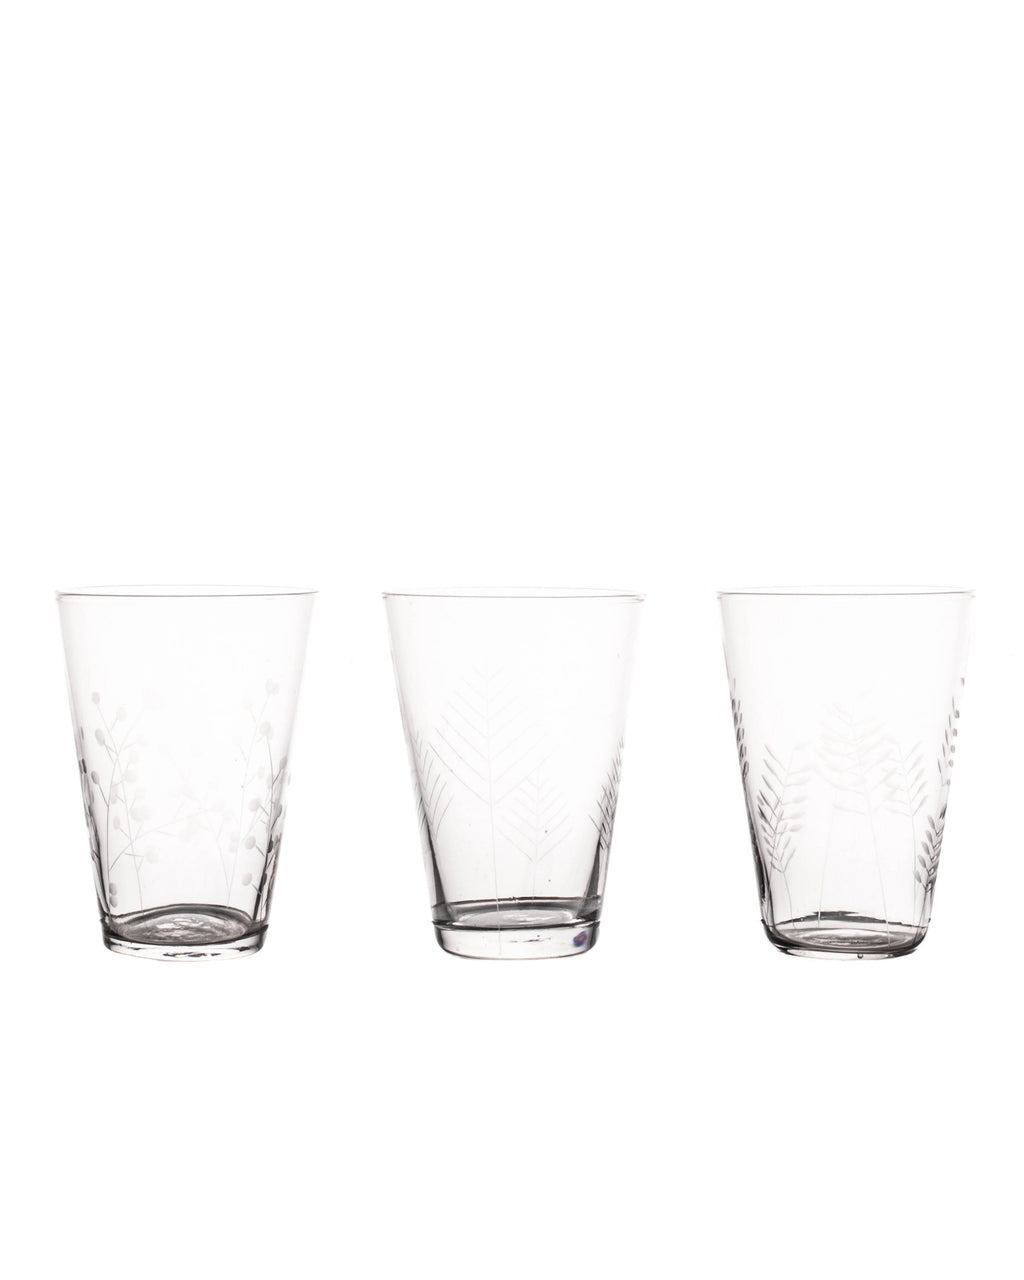 Sienna Etched Water Glasses (Set of 6)